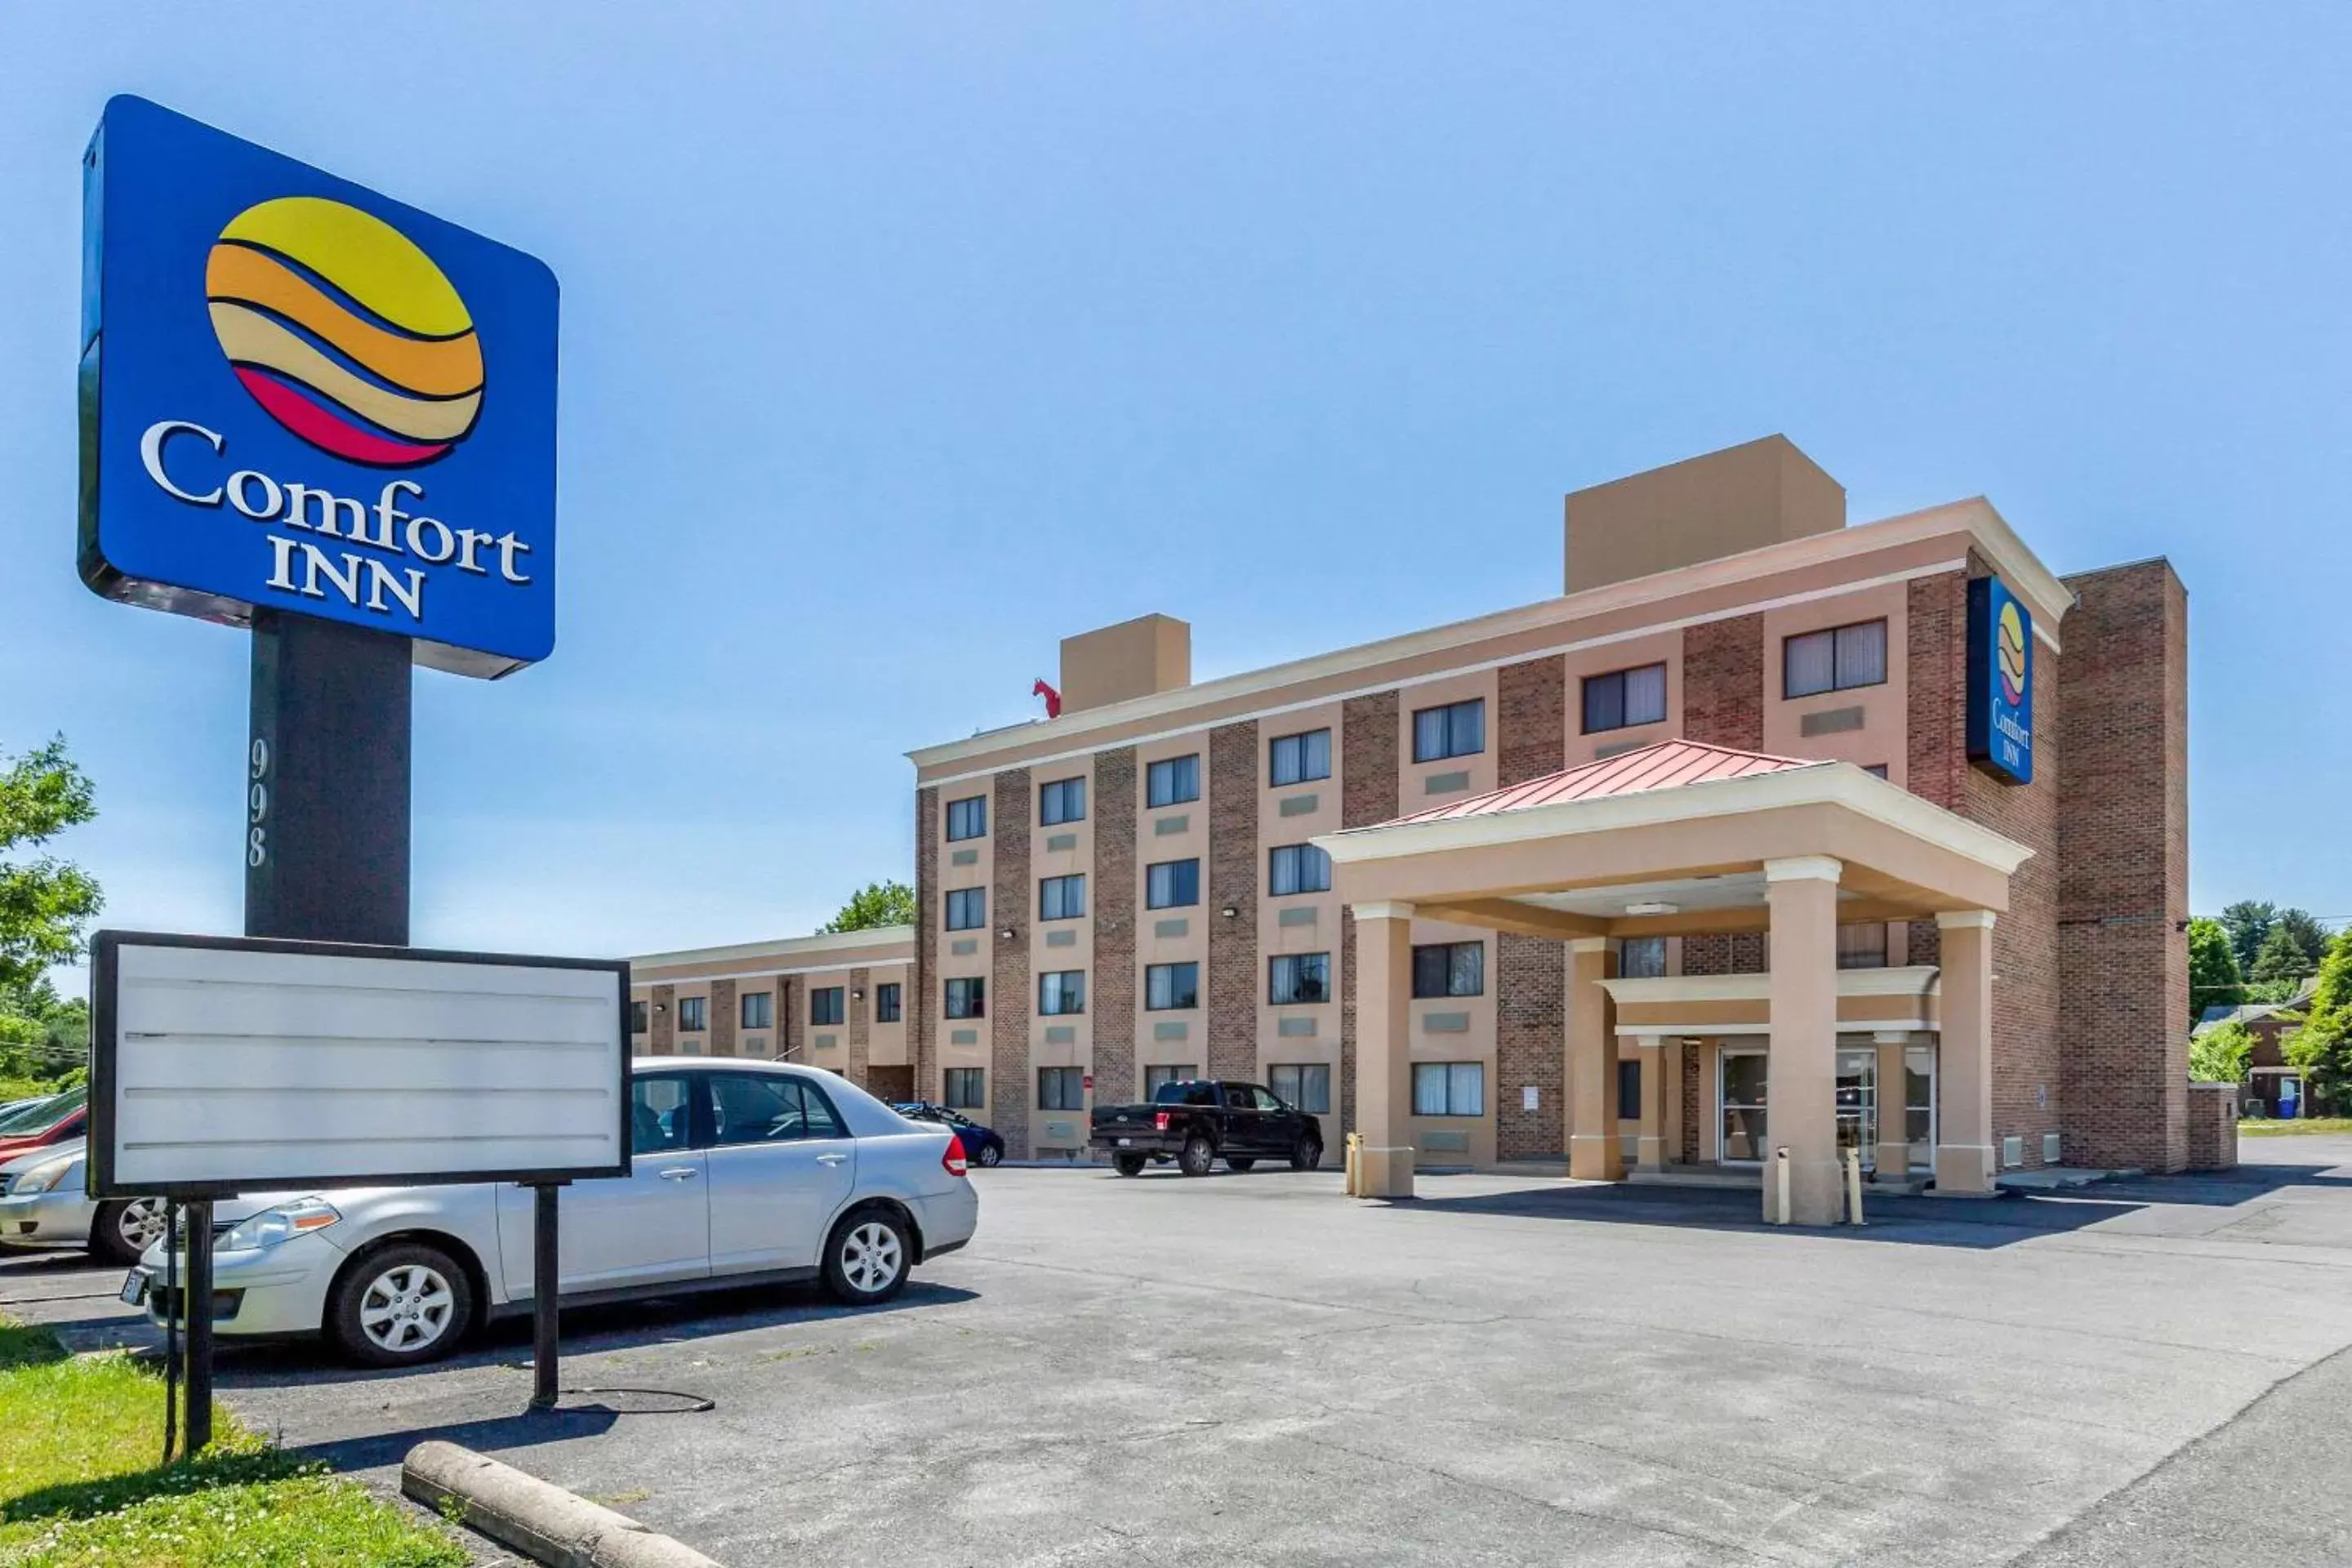 Property building in Comfort Inn Red Horse Frederick